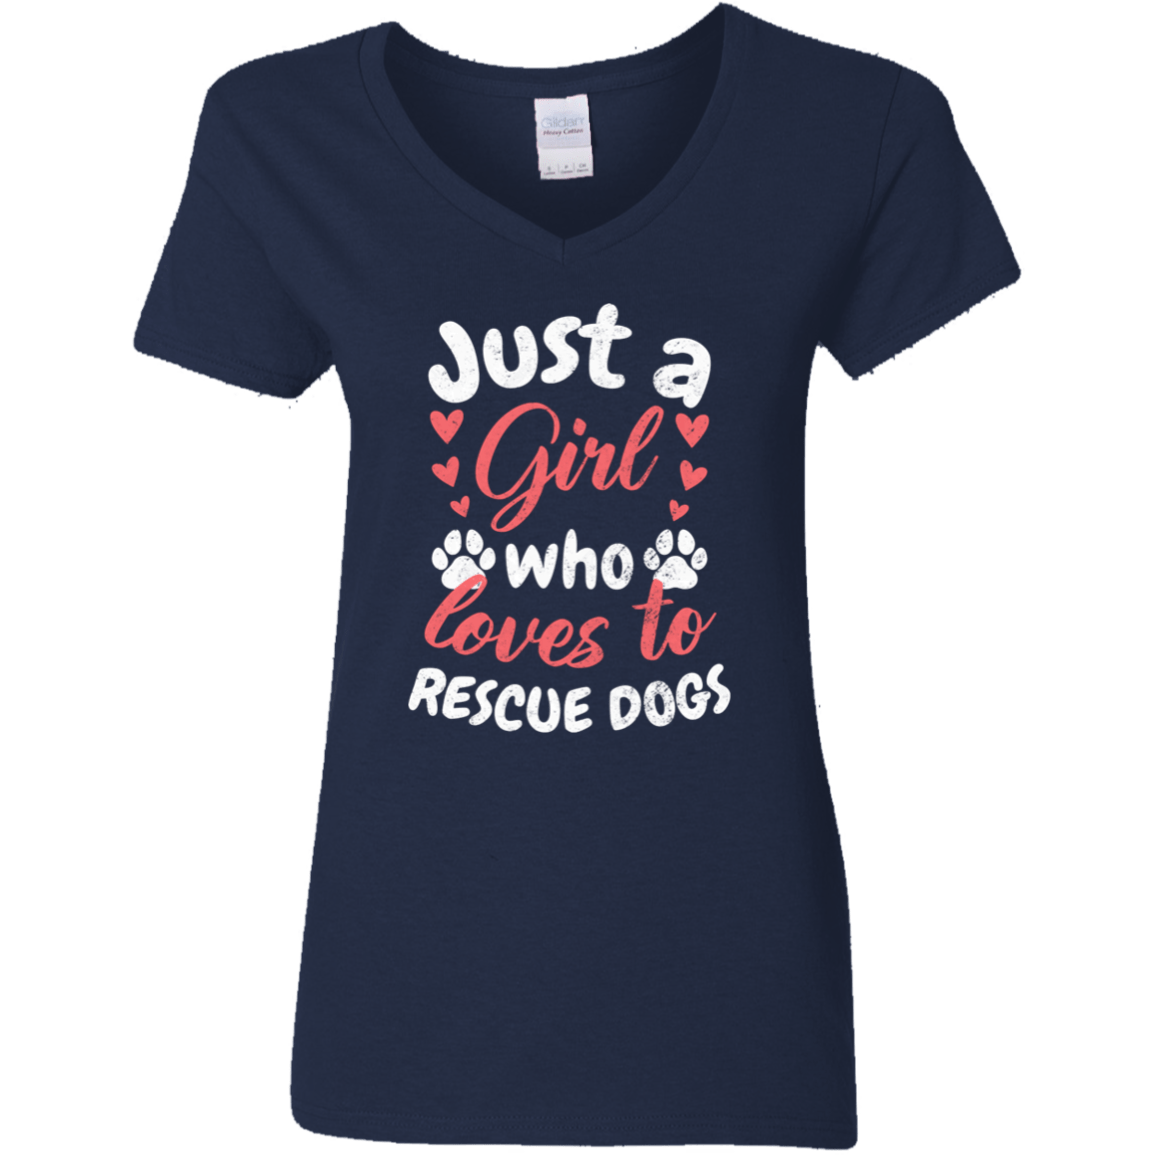 Just A Girl Who Loves To Rescue Dogs - Ladies V Neck.